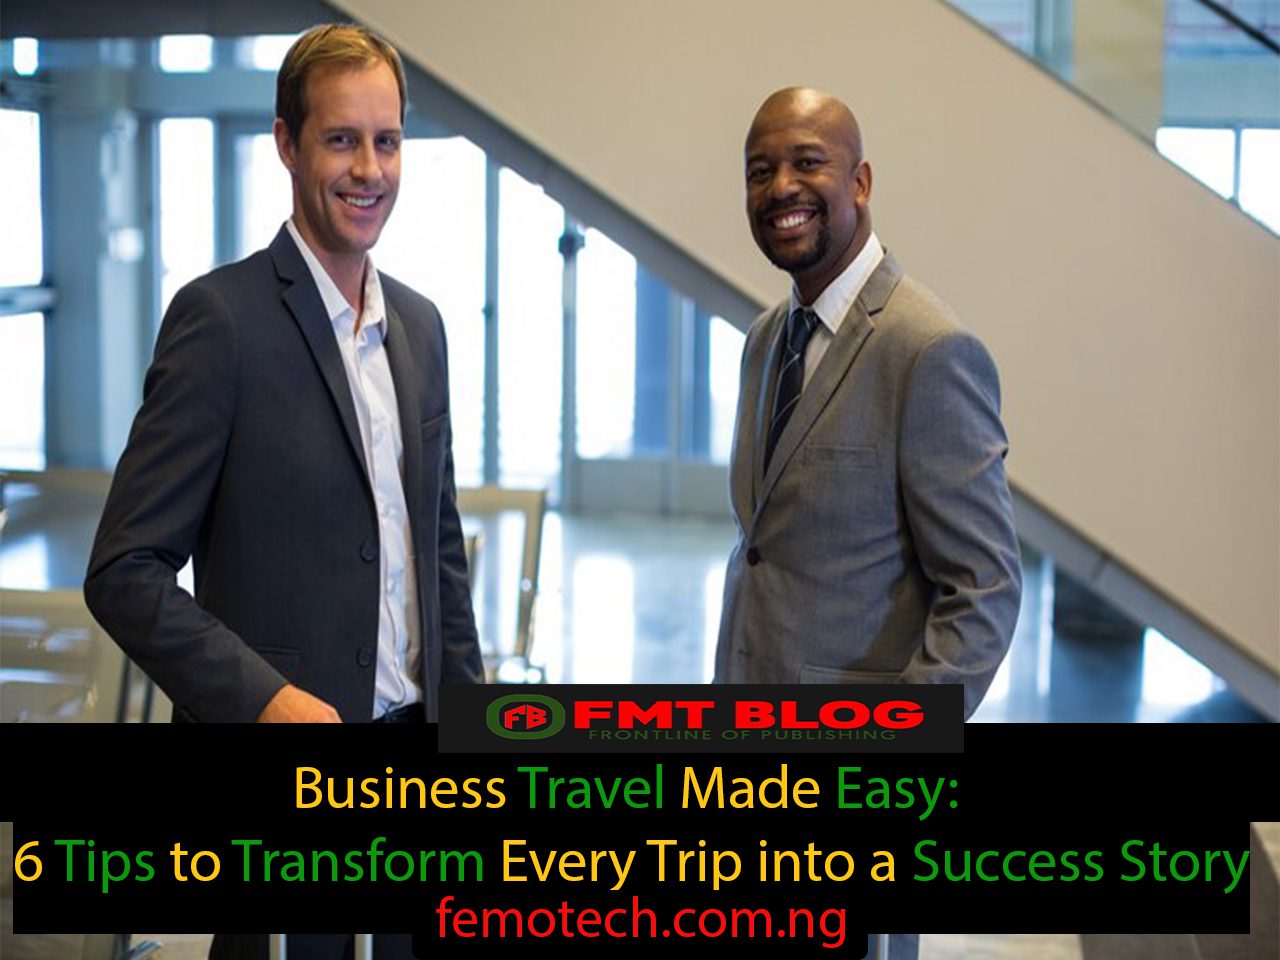 Business Travel Made Easy: 6 Tips to Transform Every Trip into a Success Story